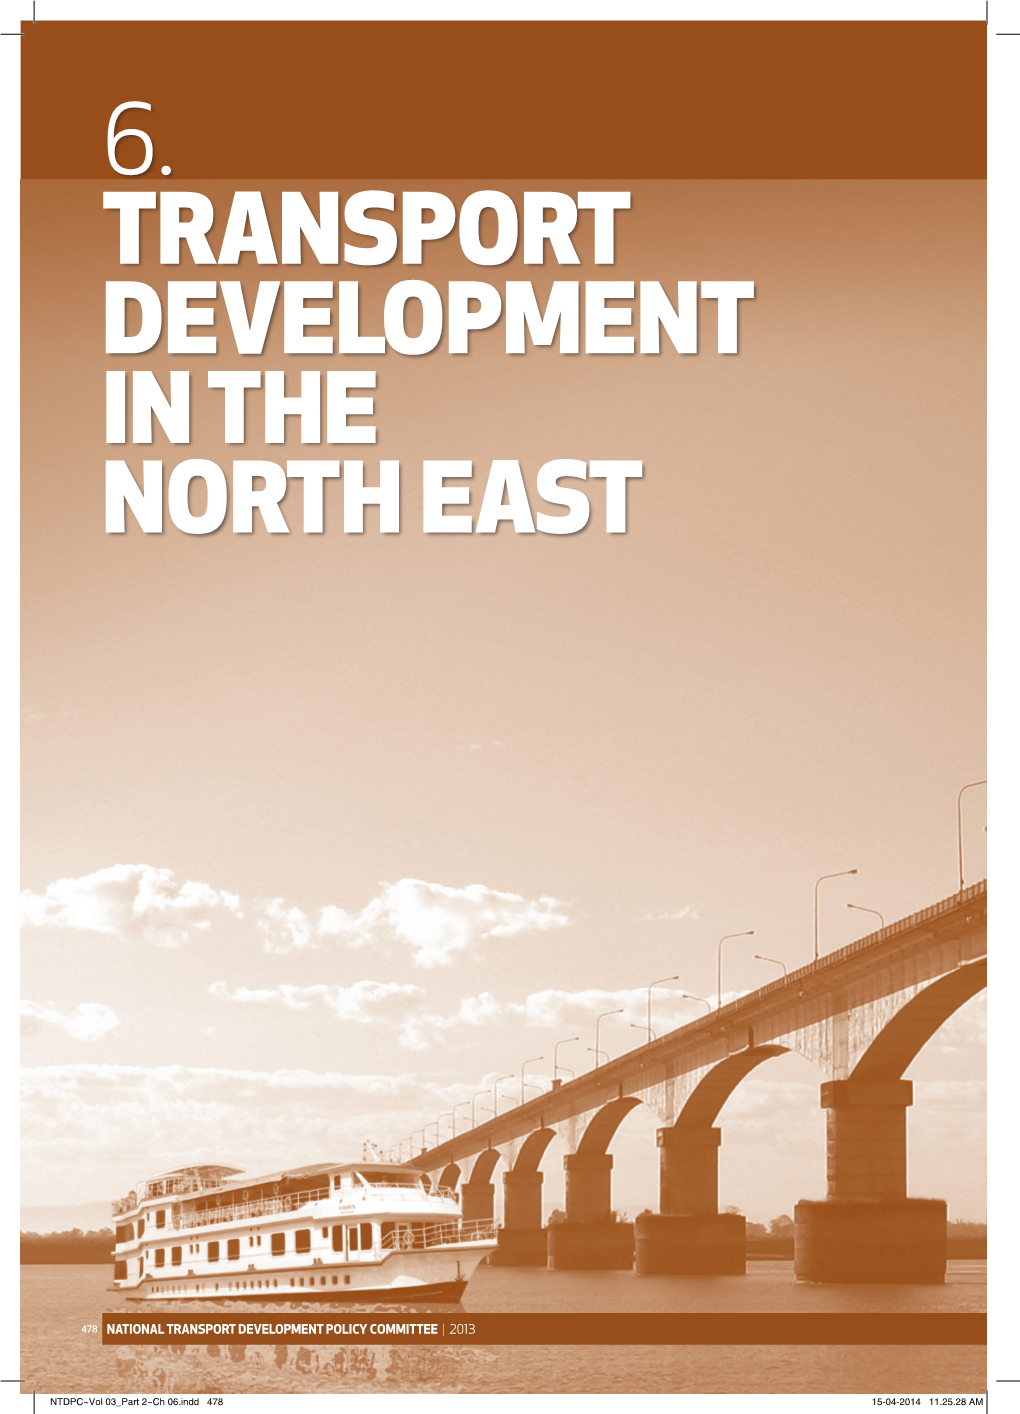 6. Transport Development in the North East